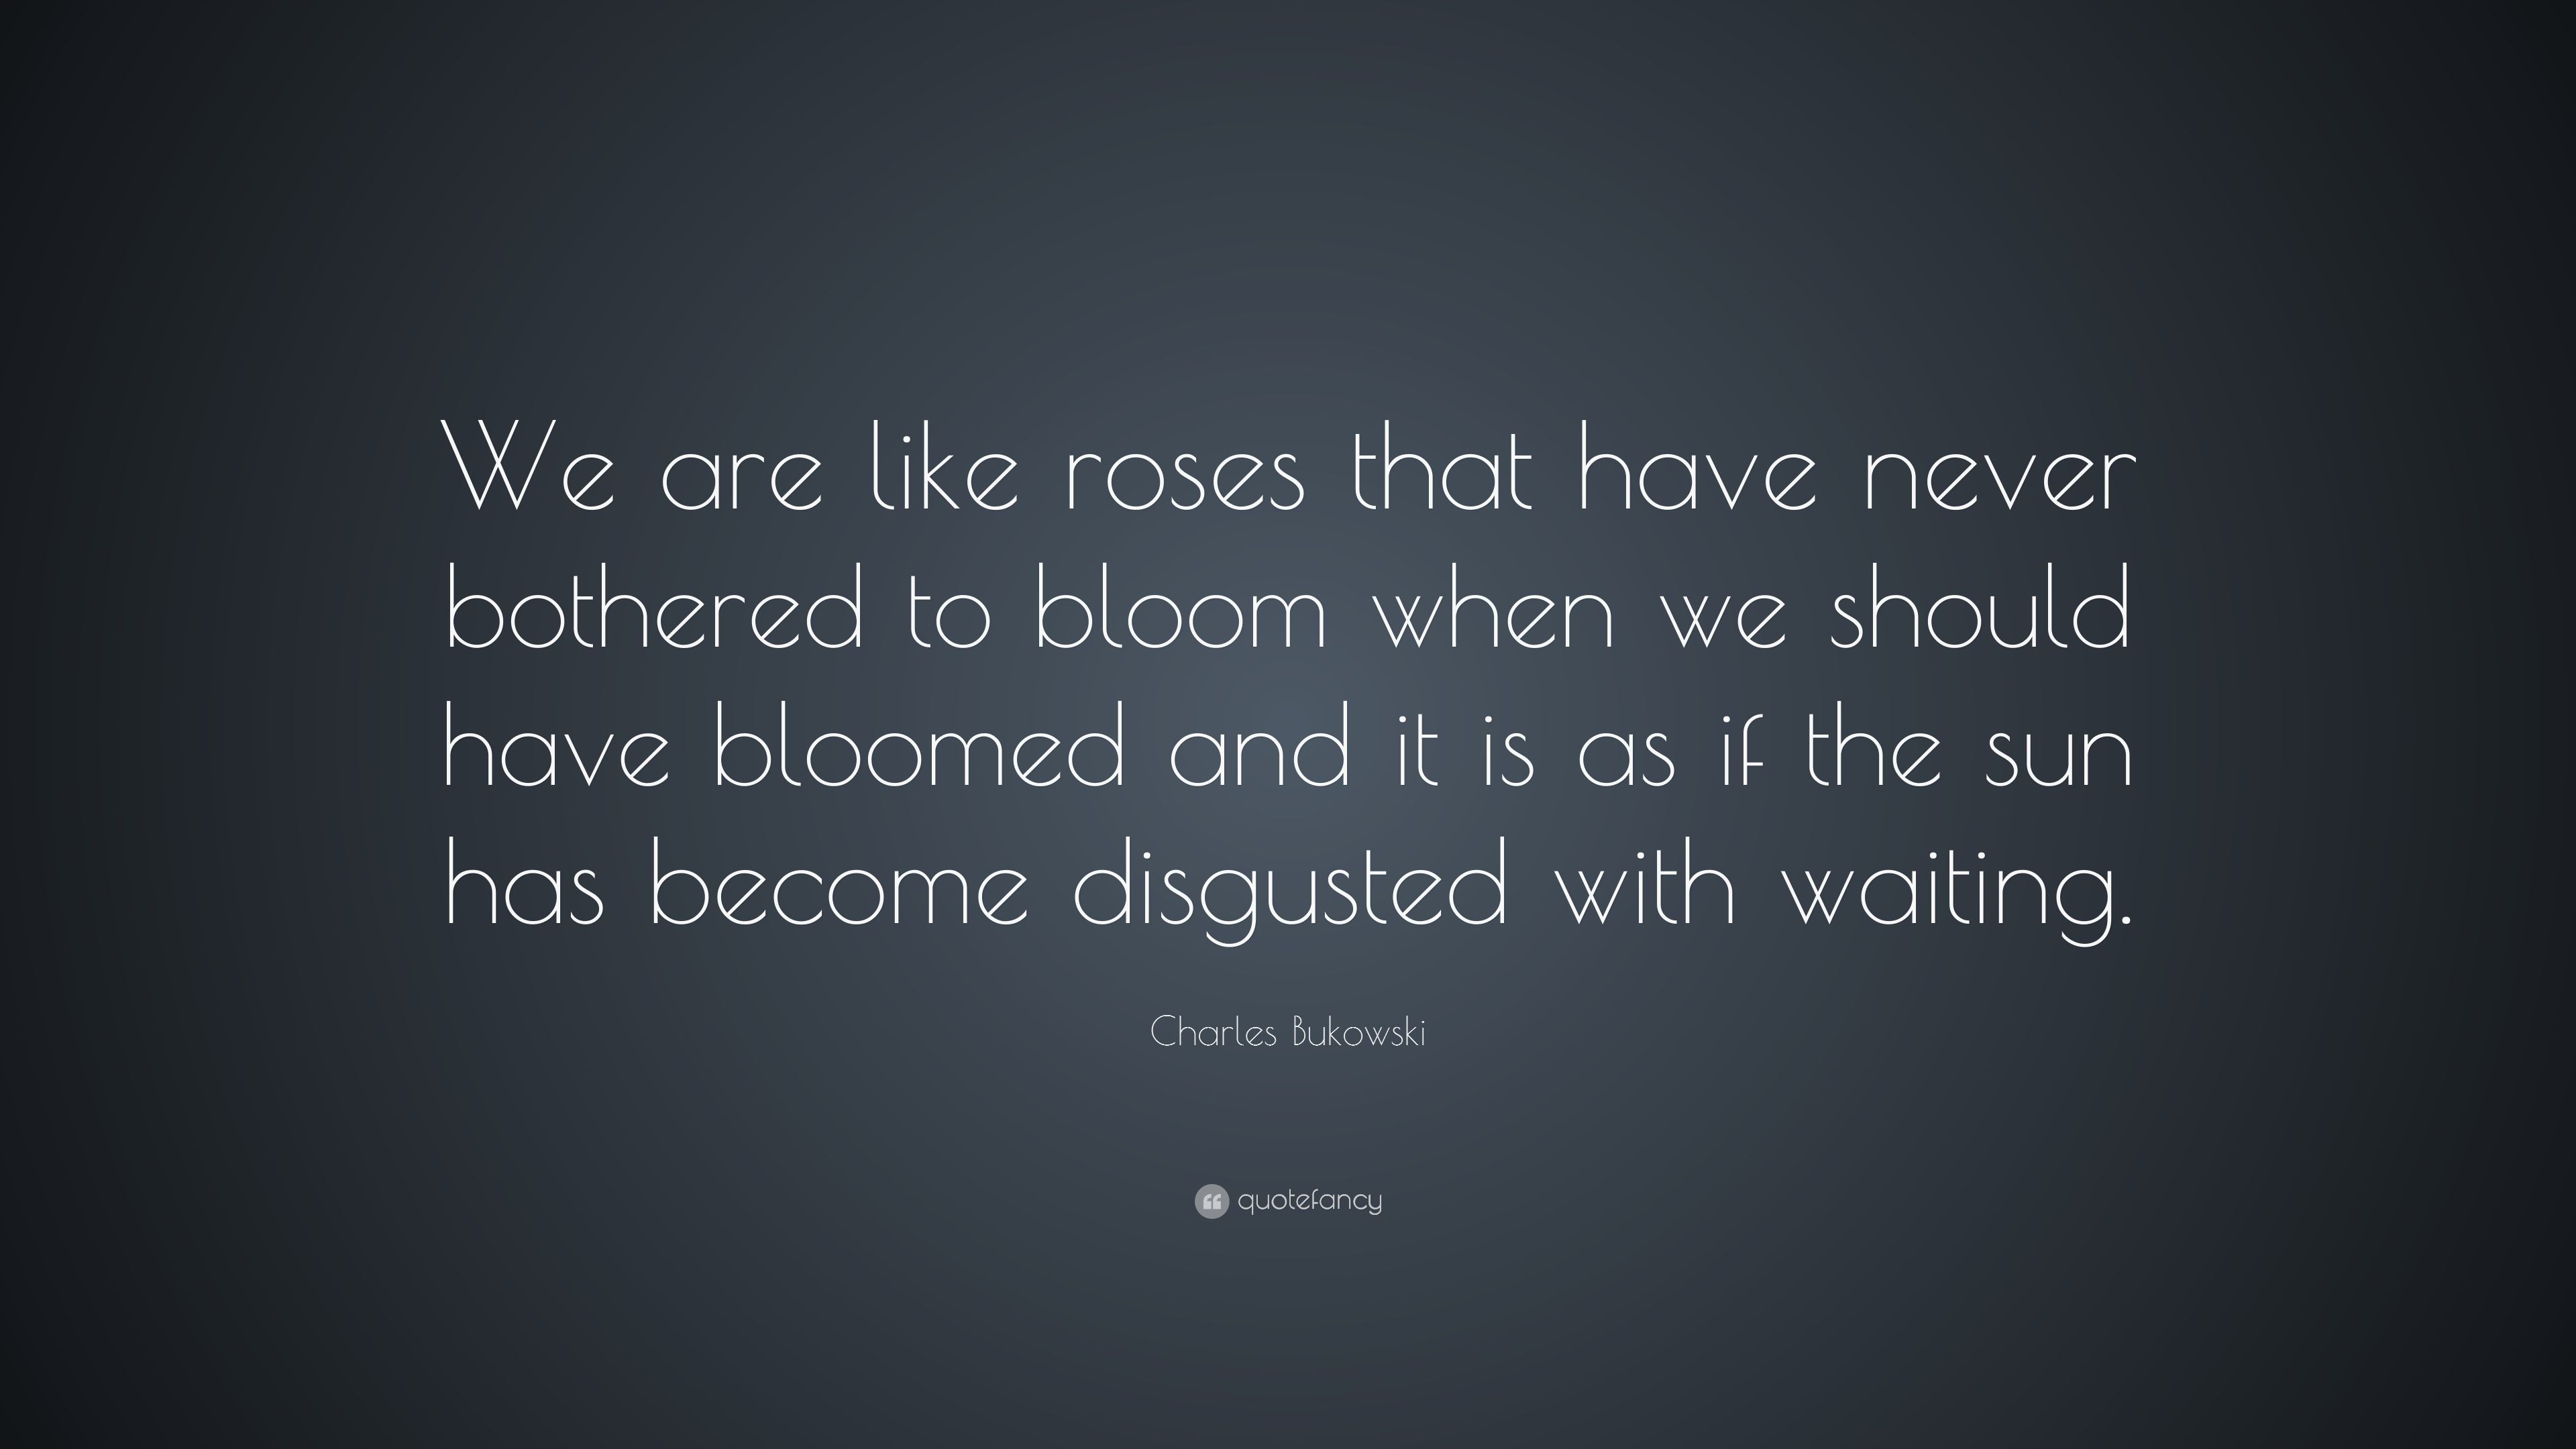 Charles Bukowski Quote: “We are like roses that have never